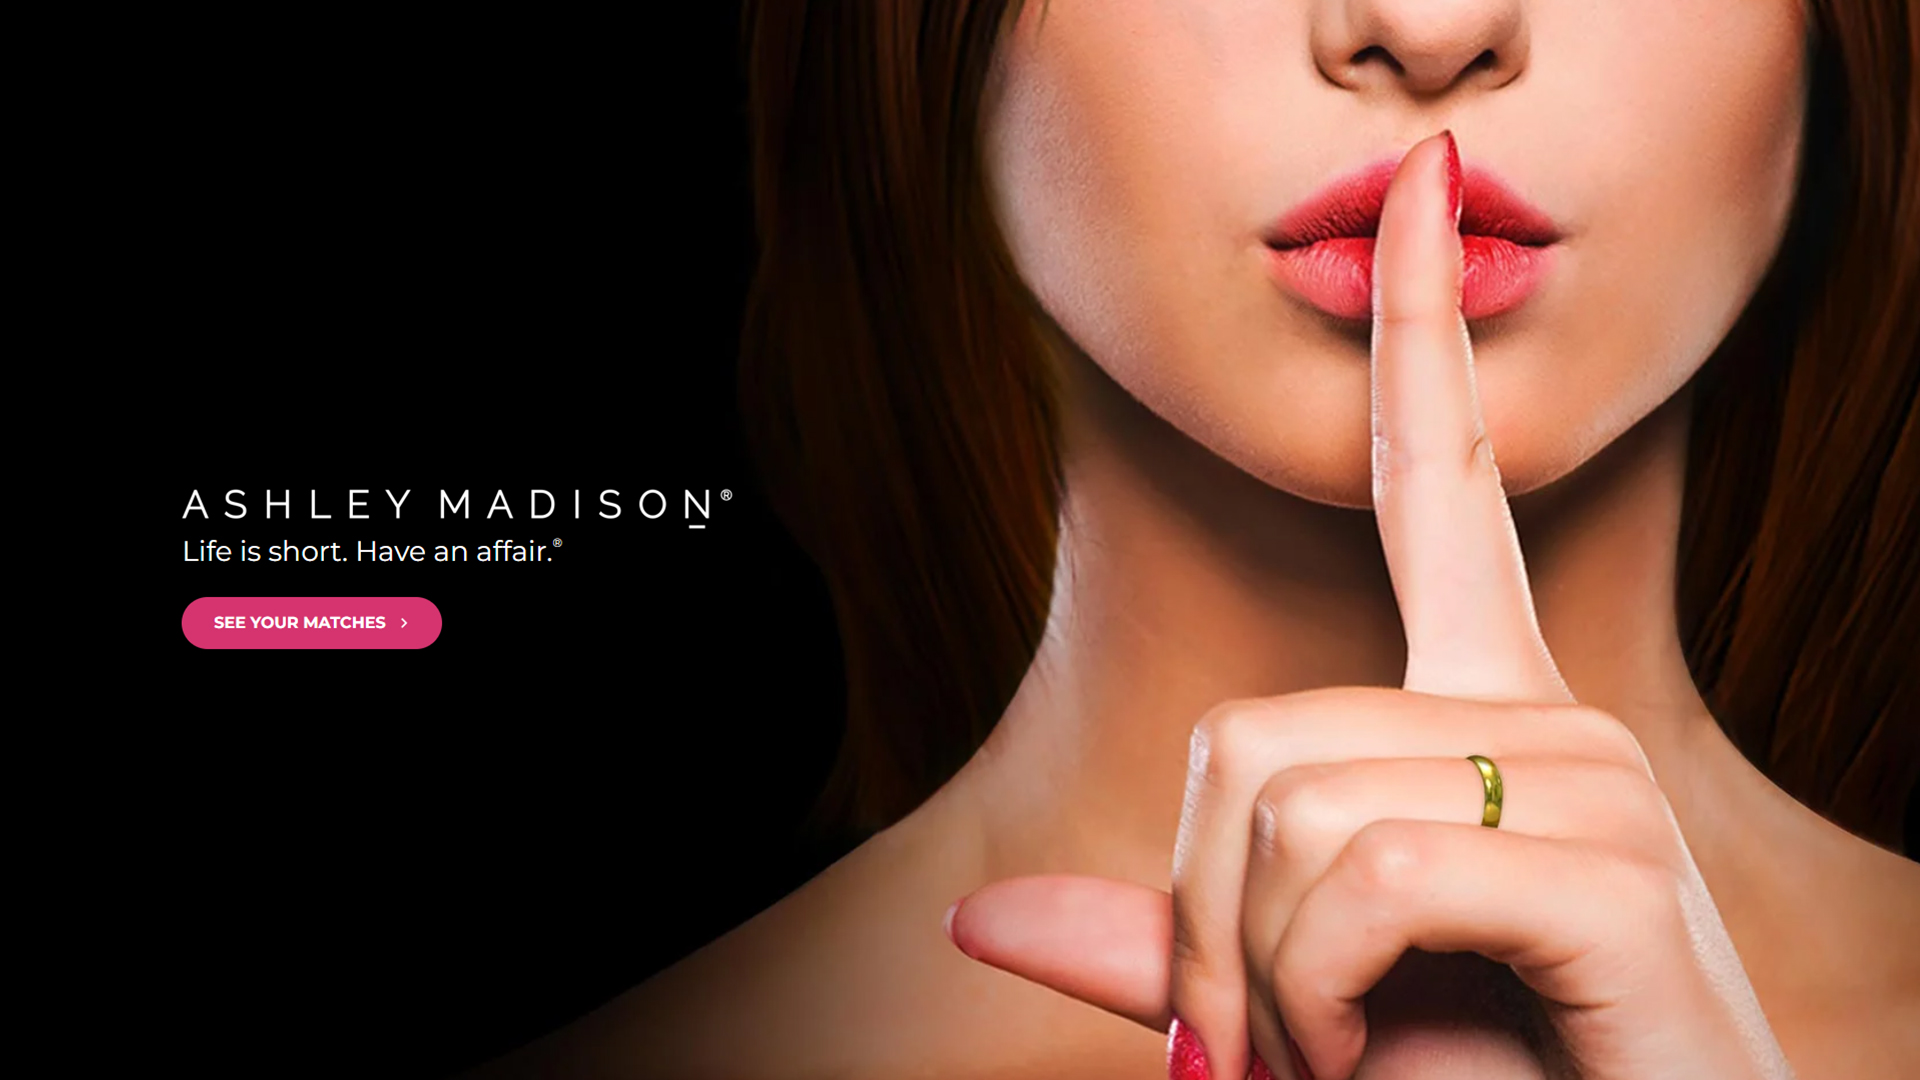 Home page of Ashley Madison dating site.